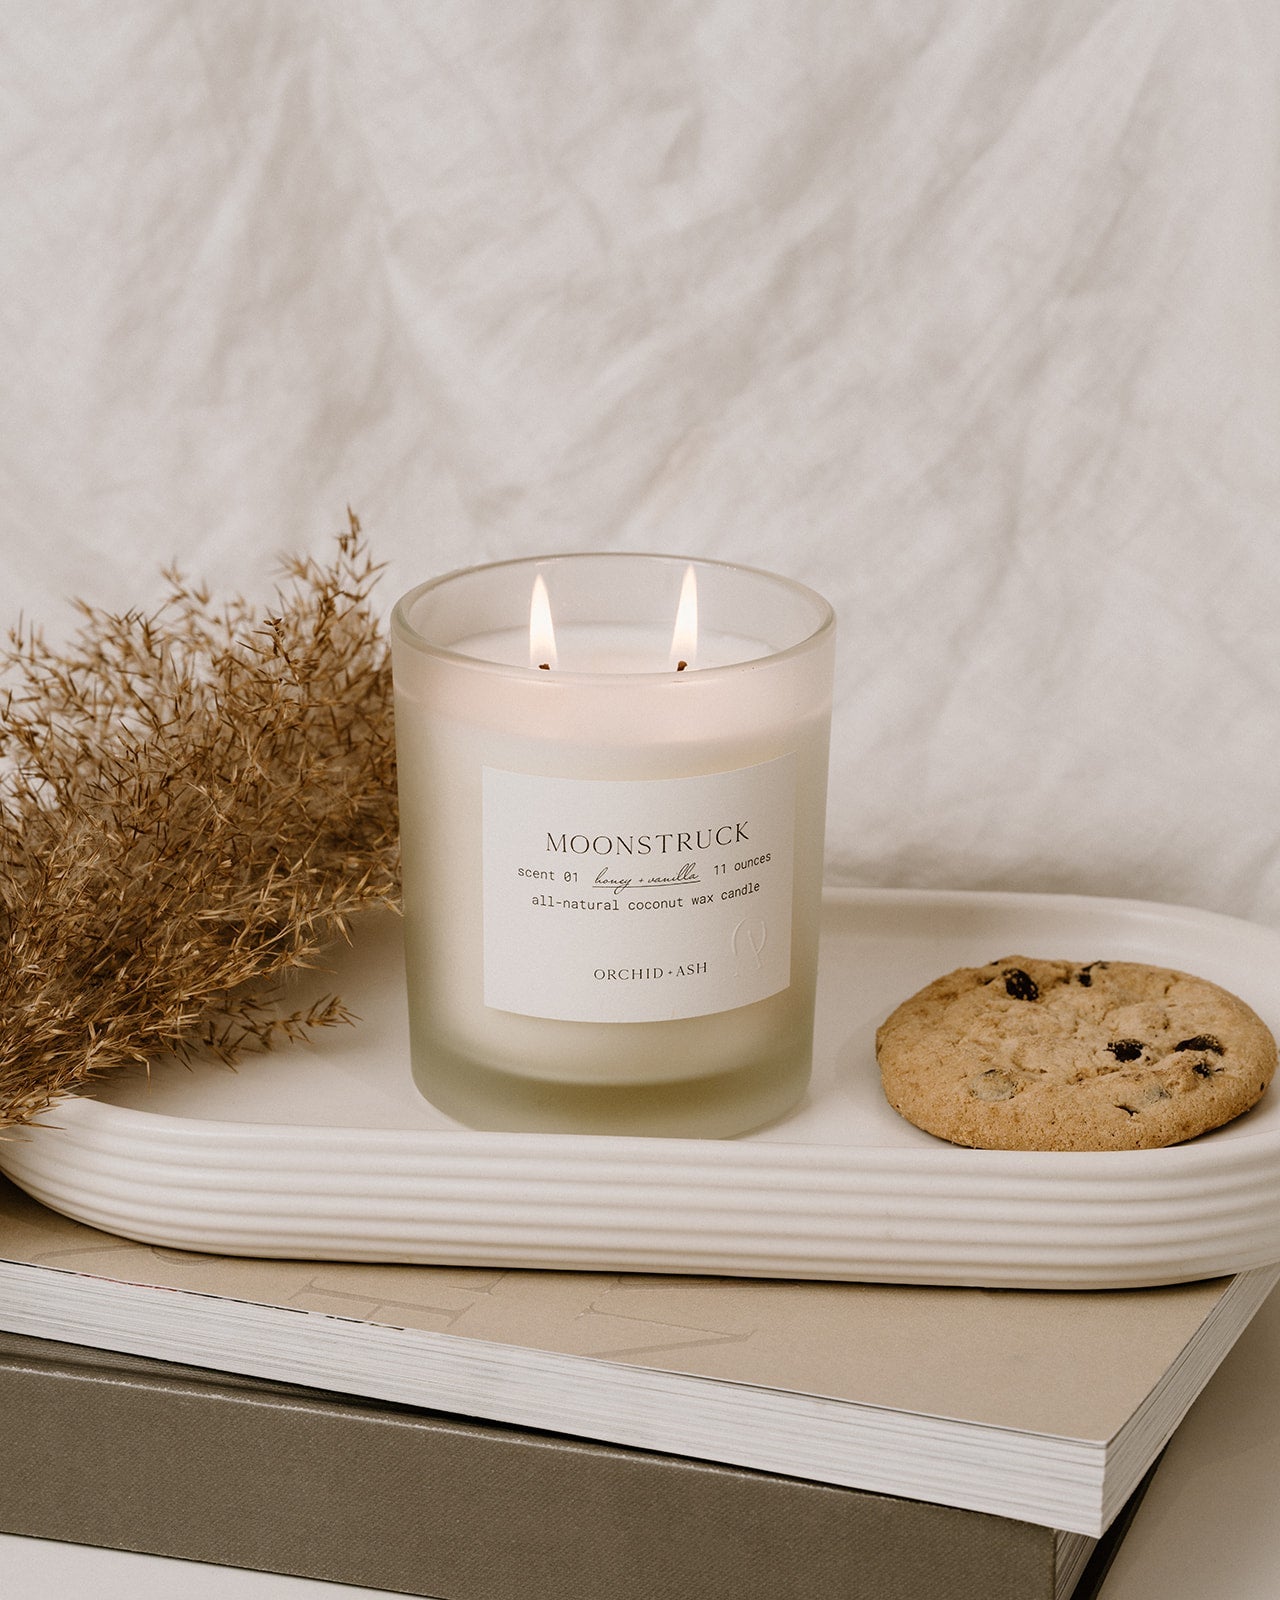  MOONSTRUCK Natural Candle by Orchid + Ash Orchid + Ash Perfumarie